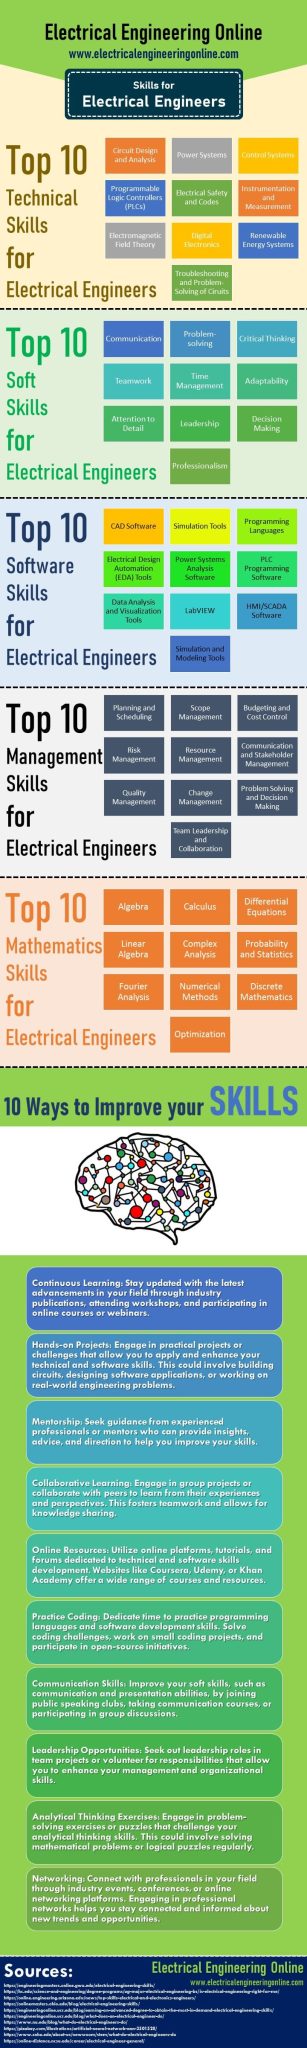 Top 50 Skills For Electrical Engineers [Technical, Soft, Software ...